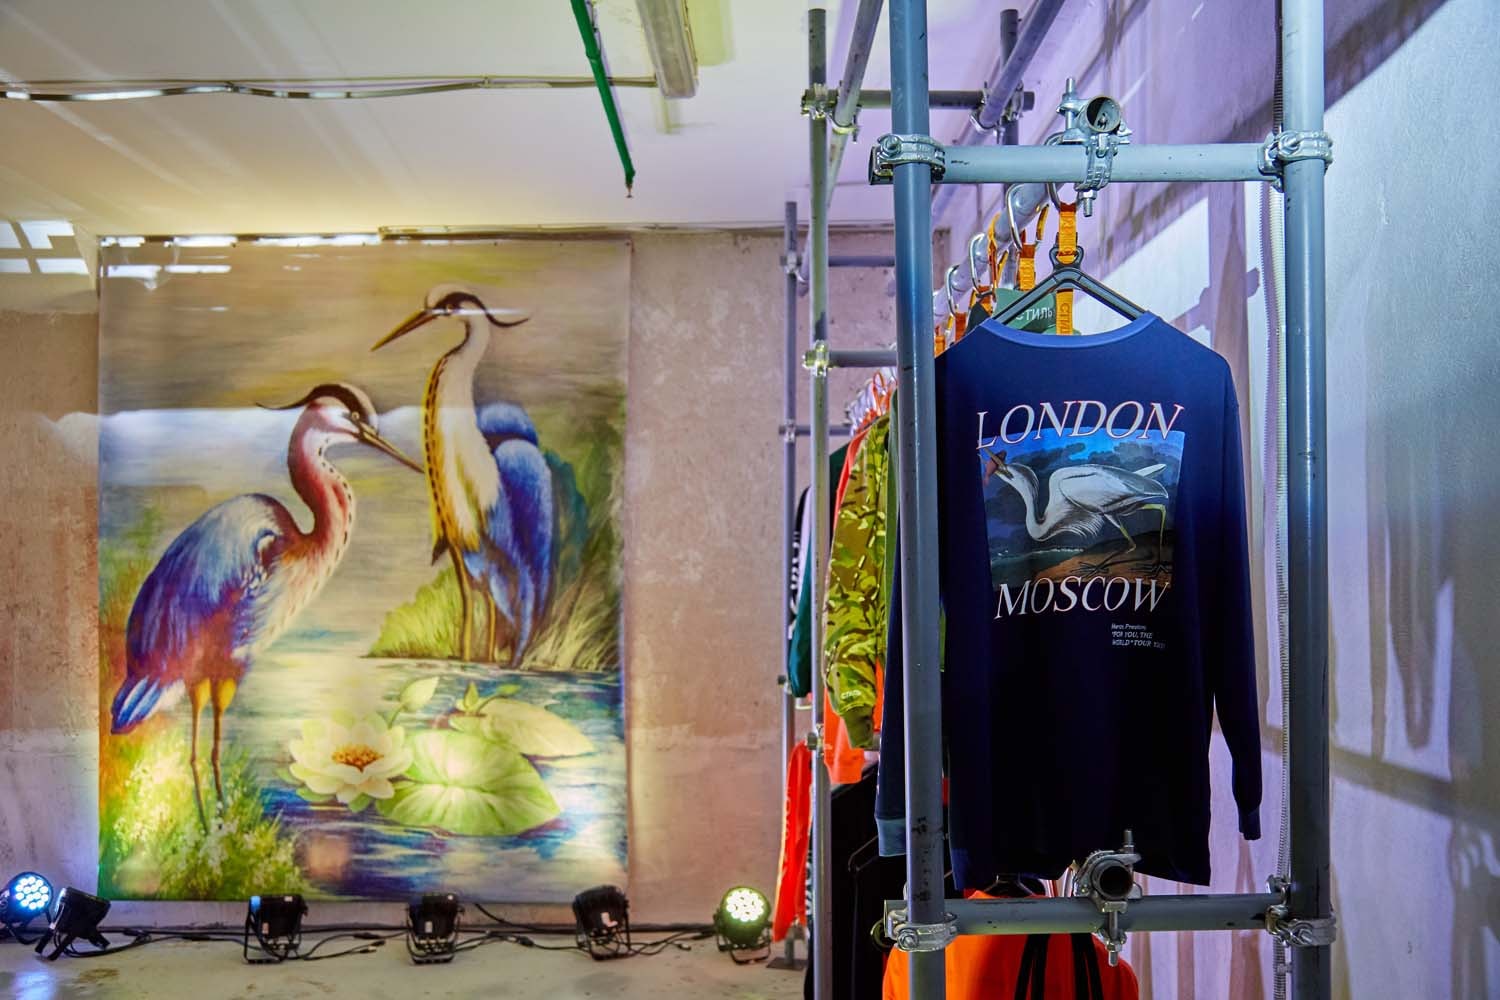 Inside Heron Preston's Pop-Up At Moscow's KM20